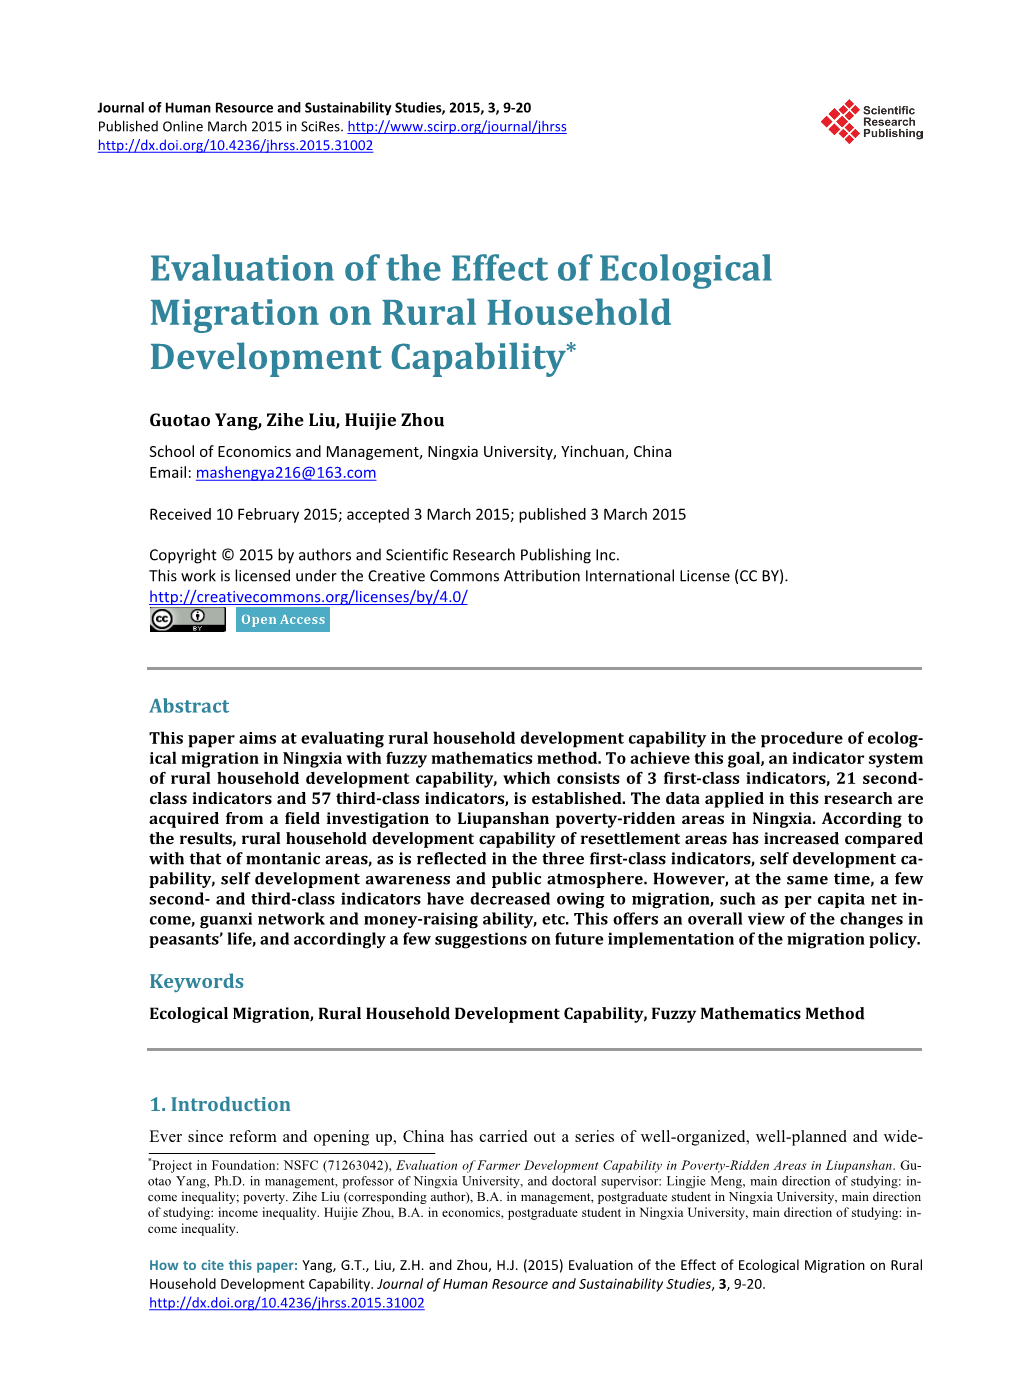 Evaluation of the Effect of Ecological Migration on Rural Household Development Capability*